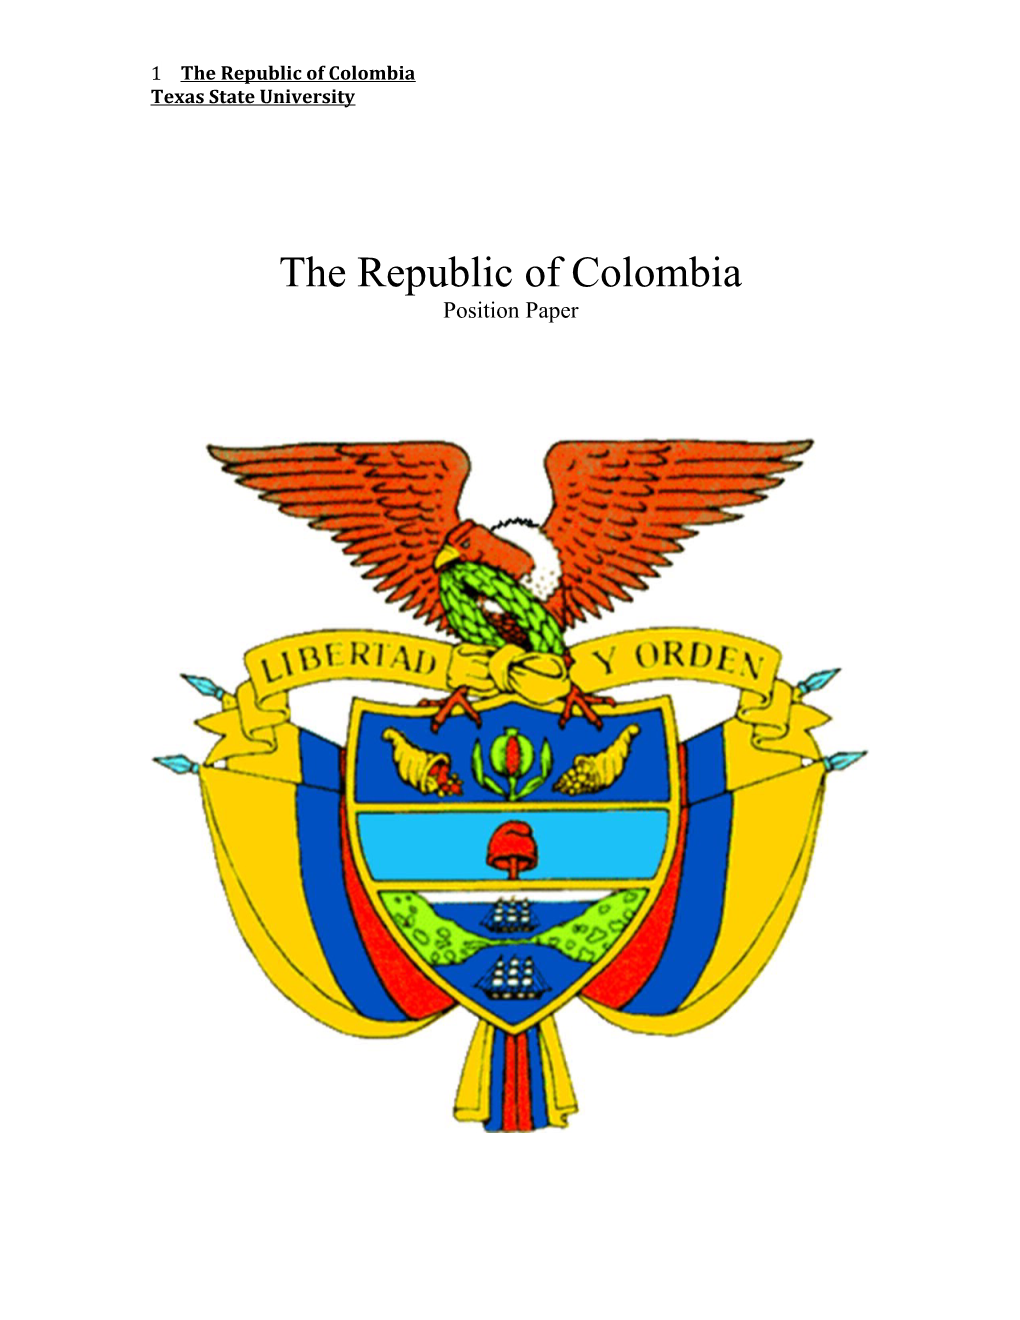 The Republic of Colombia